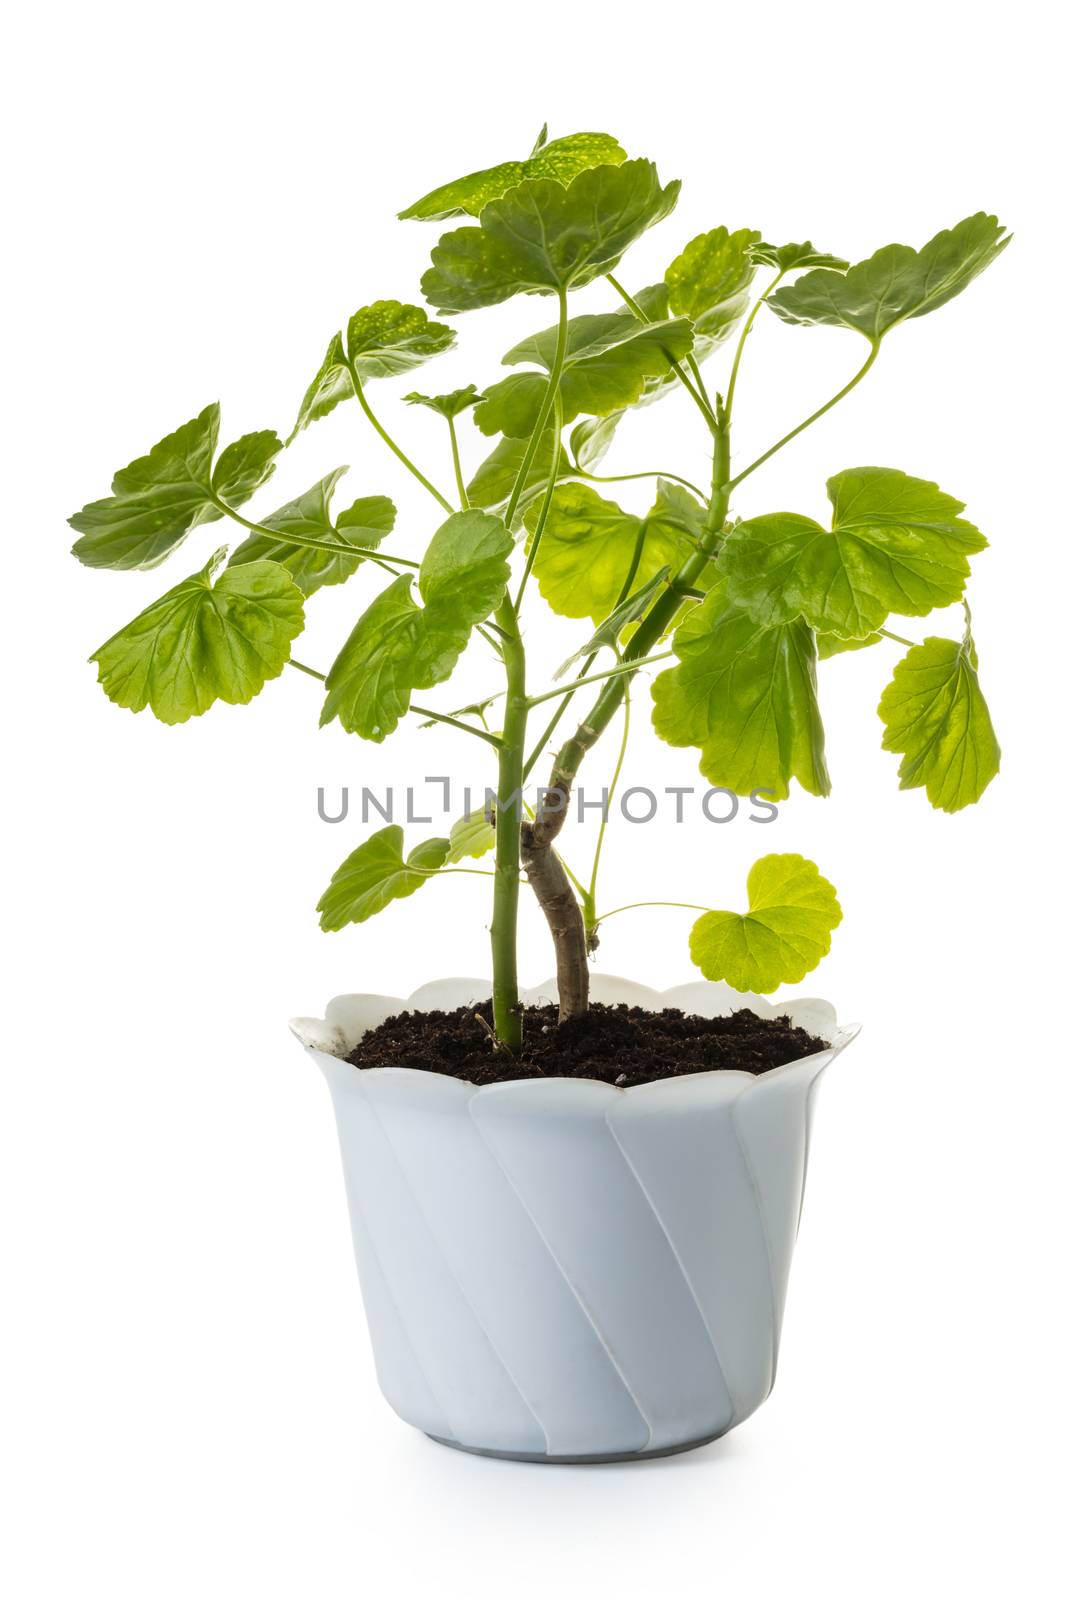 geranium in a pot isolated on white background